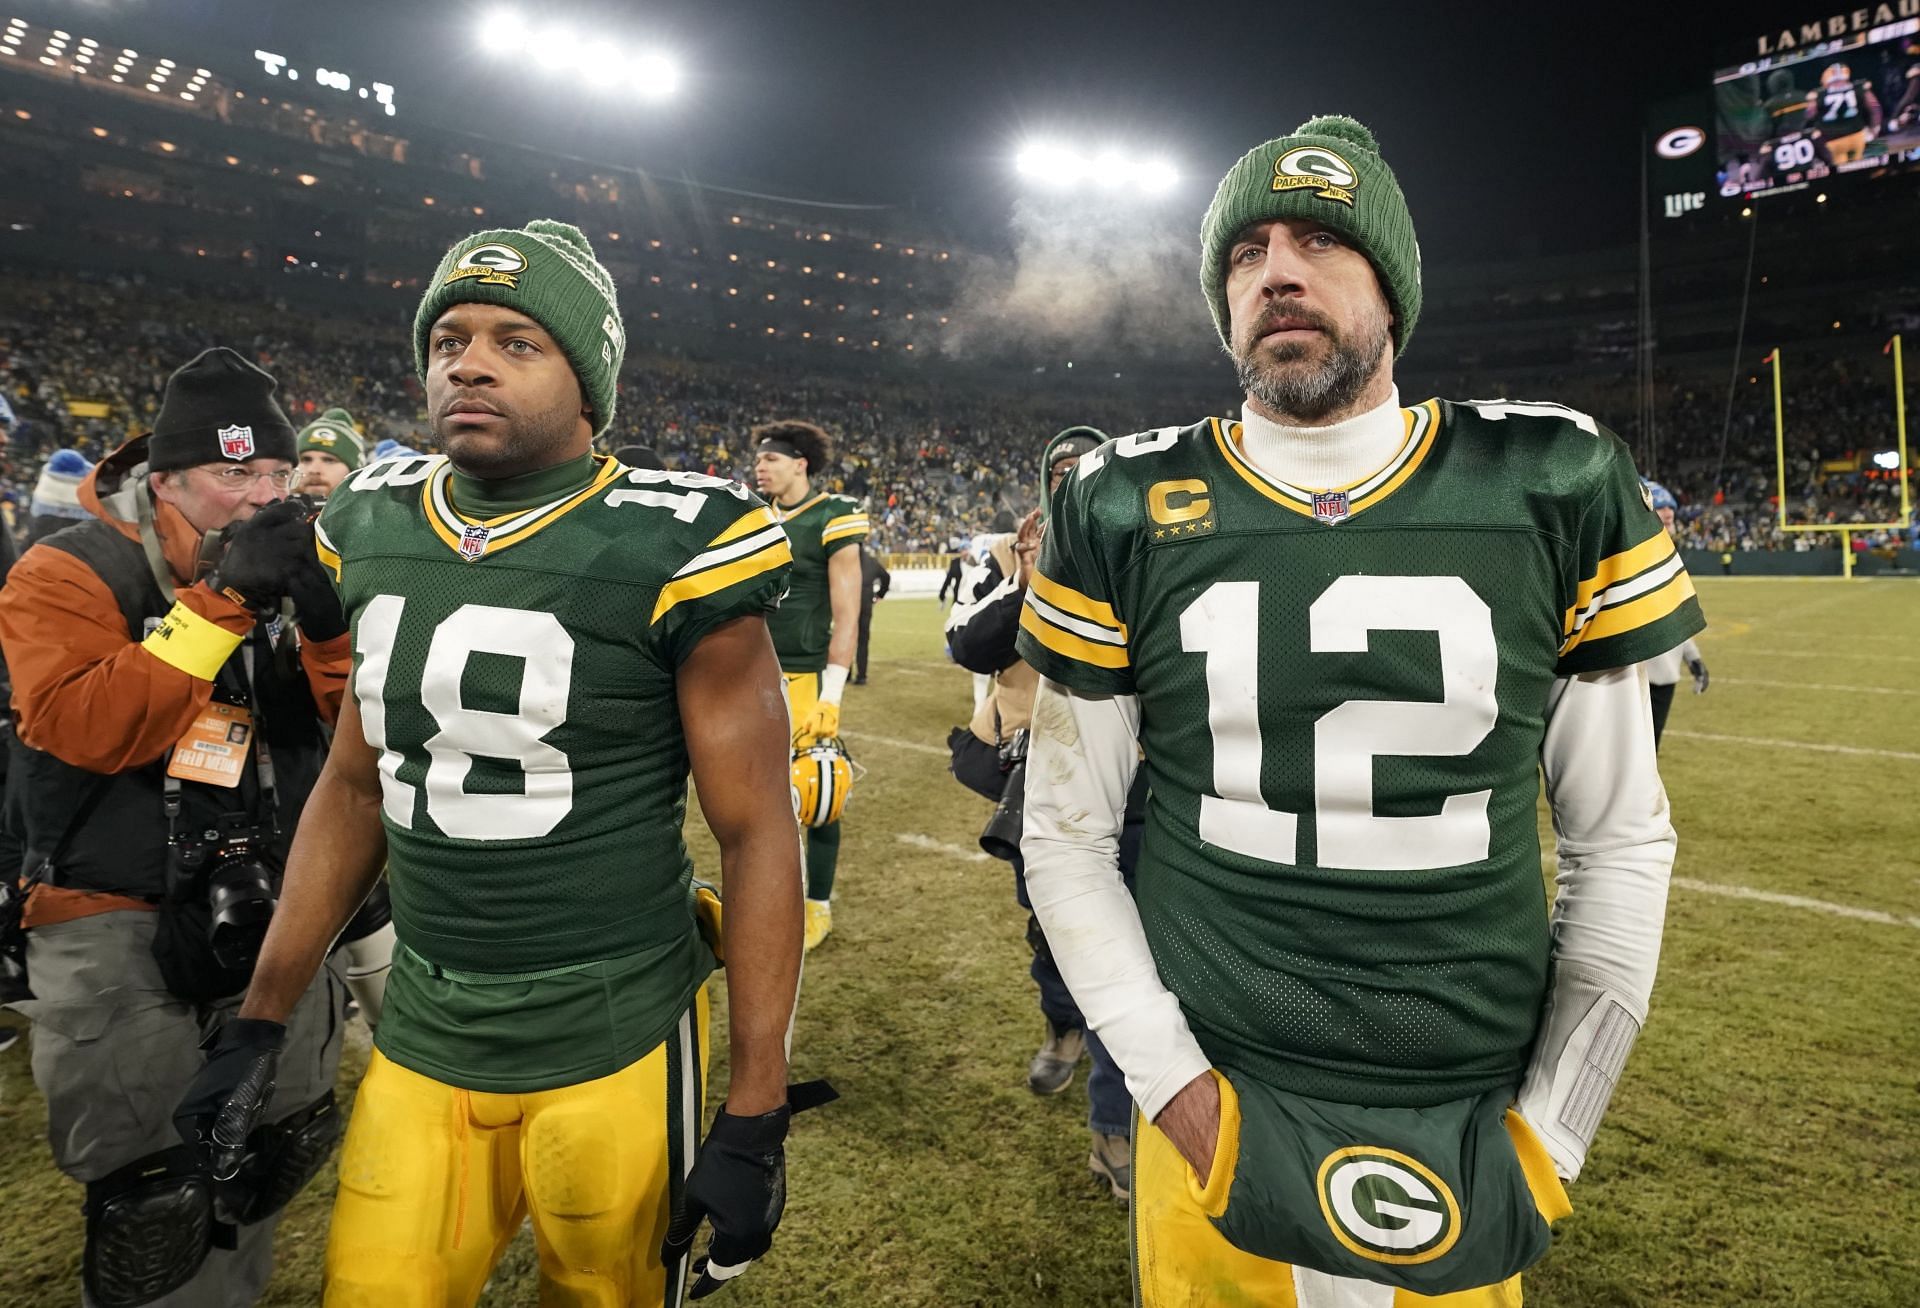 Aaron Rodgers and Randall Cobb at Detroit Lions v Green Bay Packers